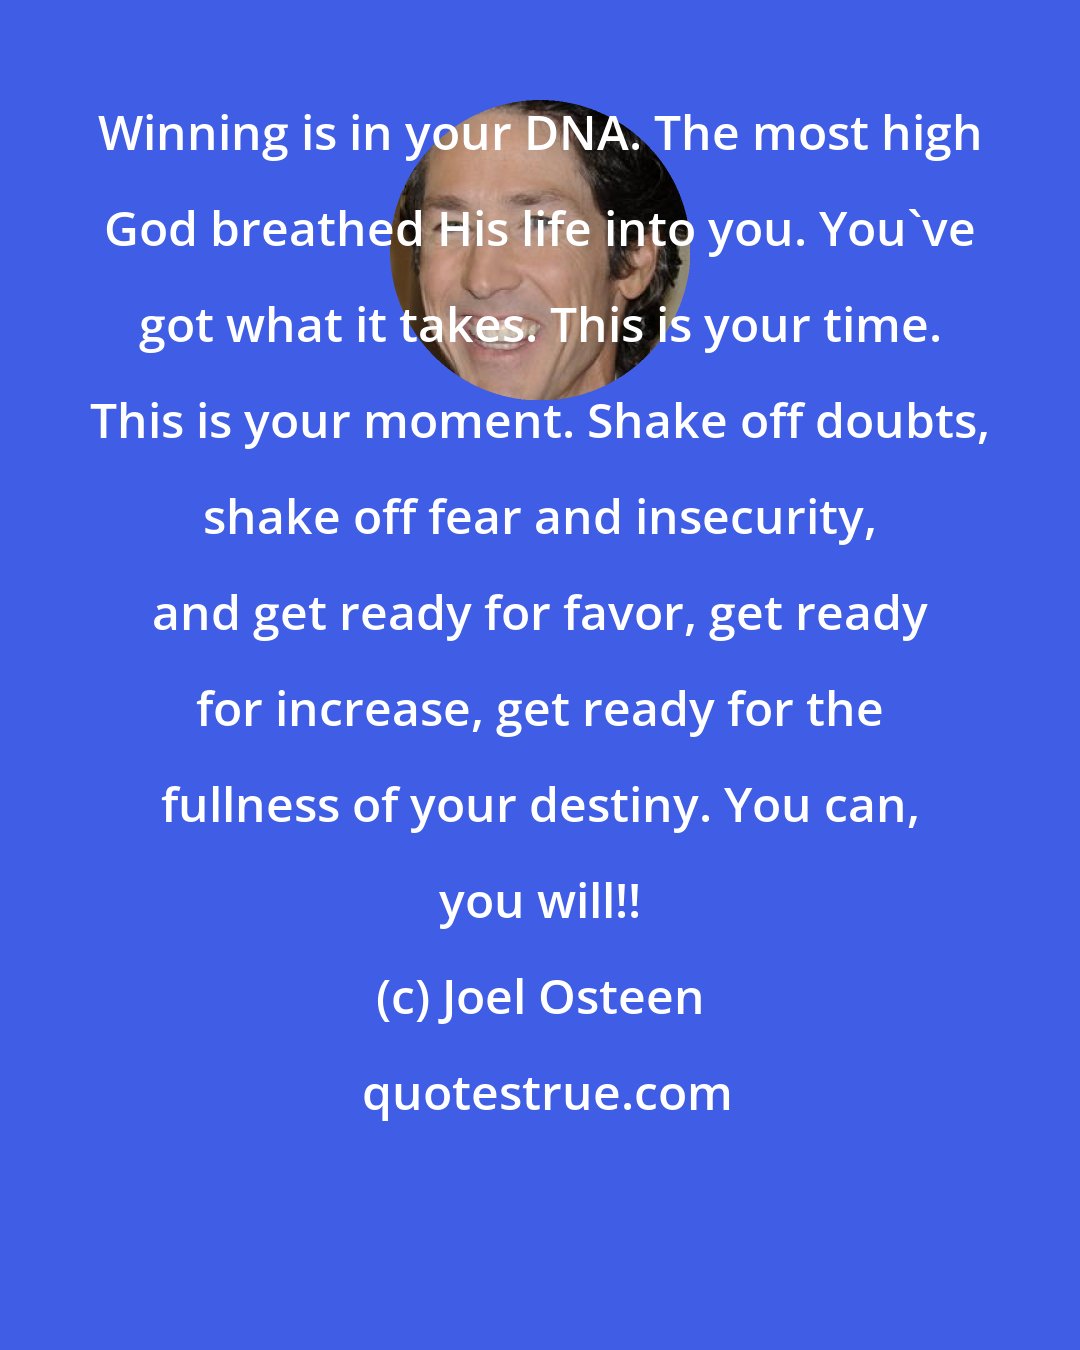 Joel Osteen: Winning is in your DNA. The most high God breathed His life into you. You've got what it takes. This is your time. This is your moment. Shake off doubts, shake off fear and insecurity, and get ready for favor, get ready for increase, get ready for the fullness of your destiny. You can, you will!!